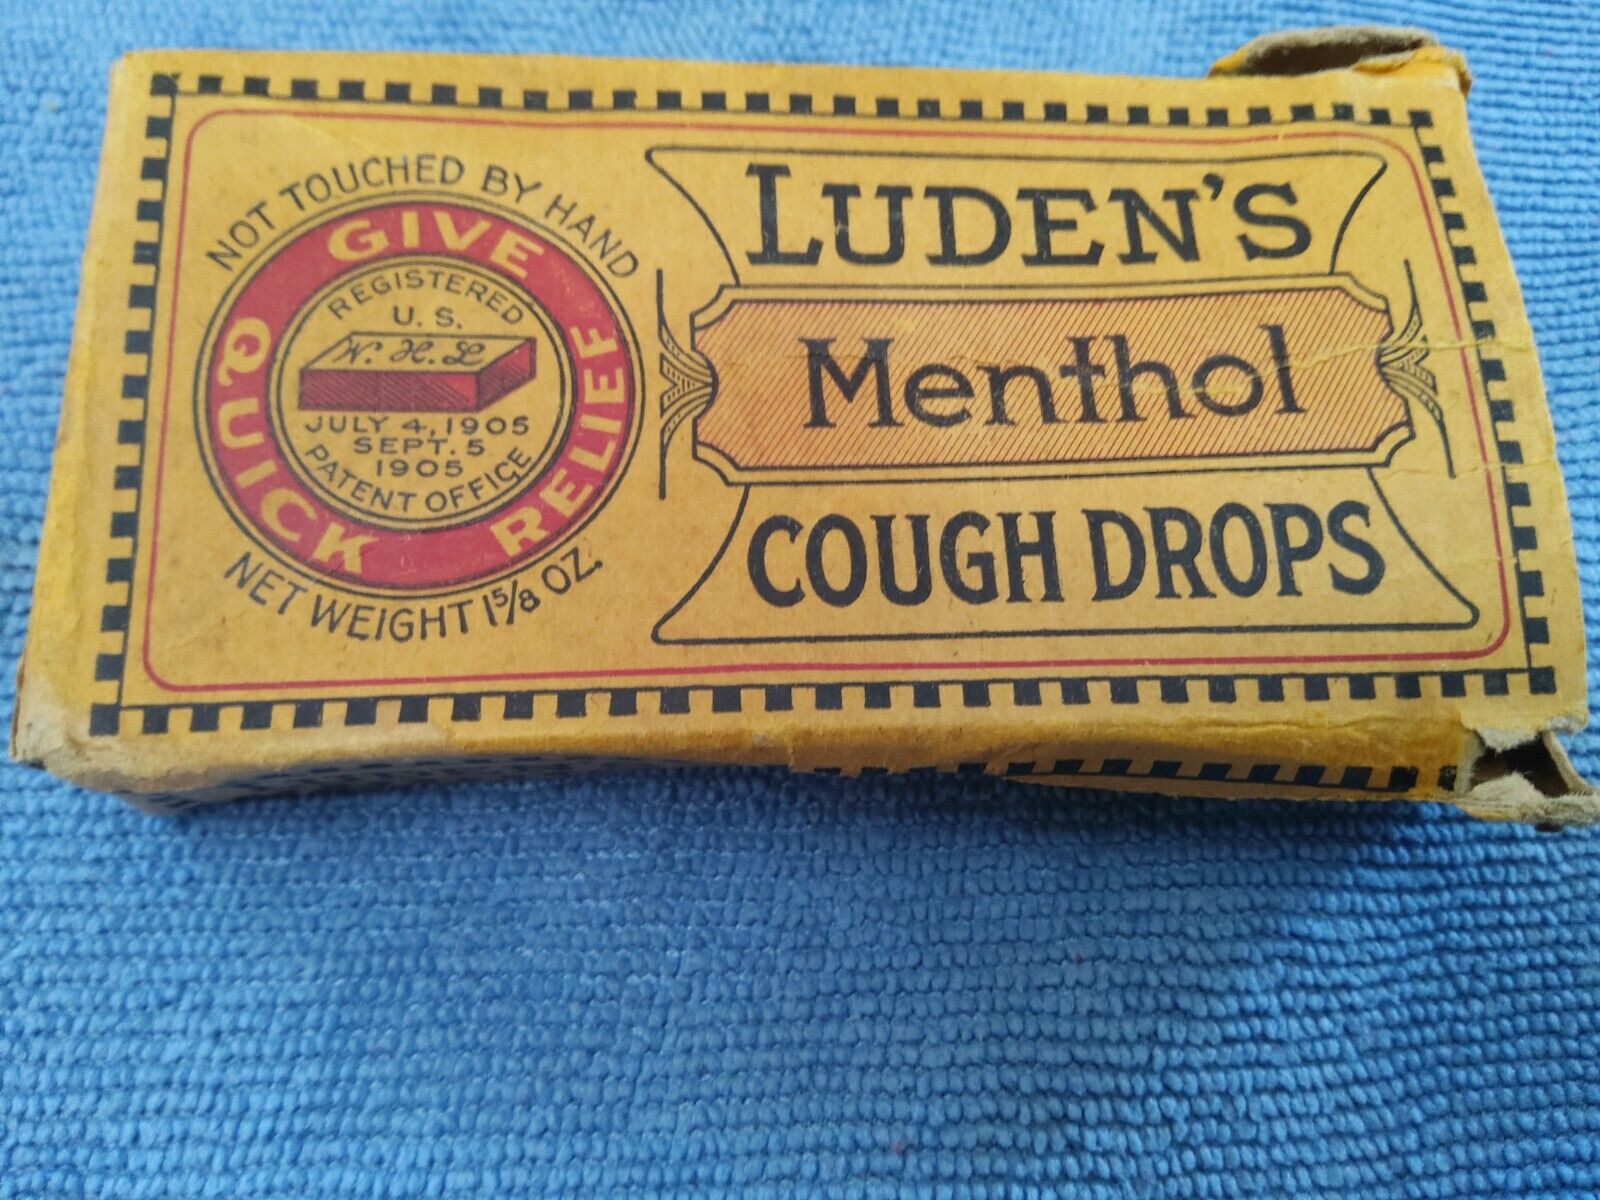 VINTAGE EARLY LUDENS MENTHOL COUGH DROPS BOX PAT. 1905